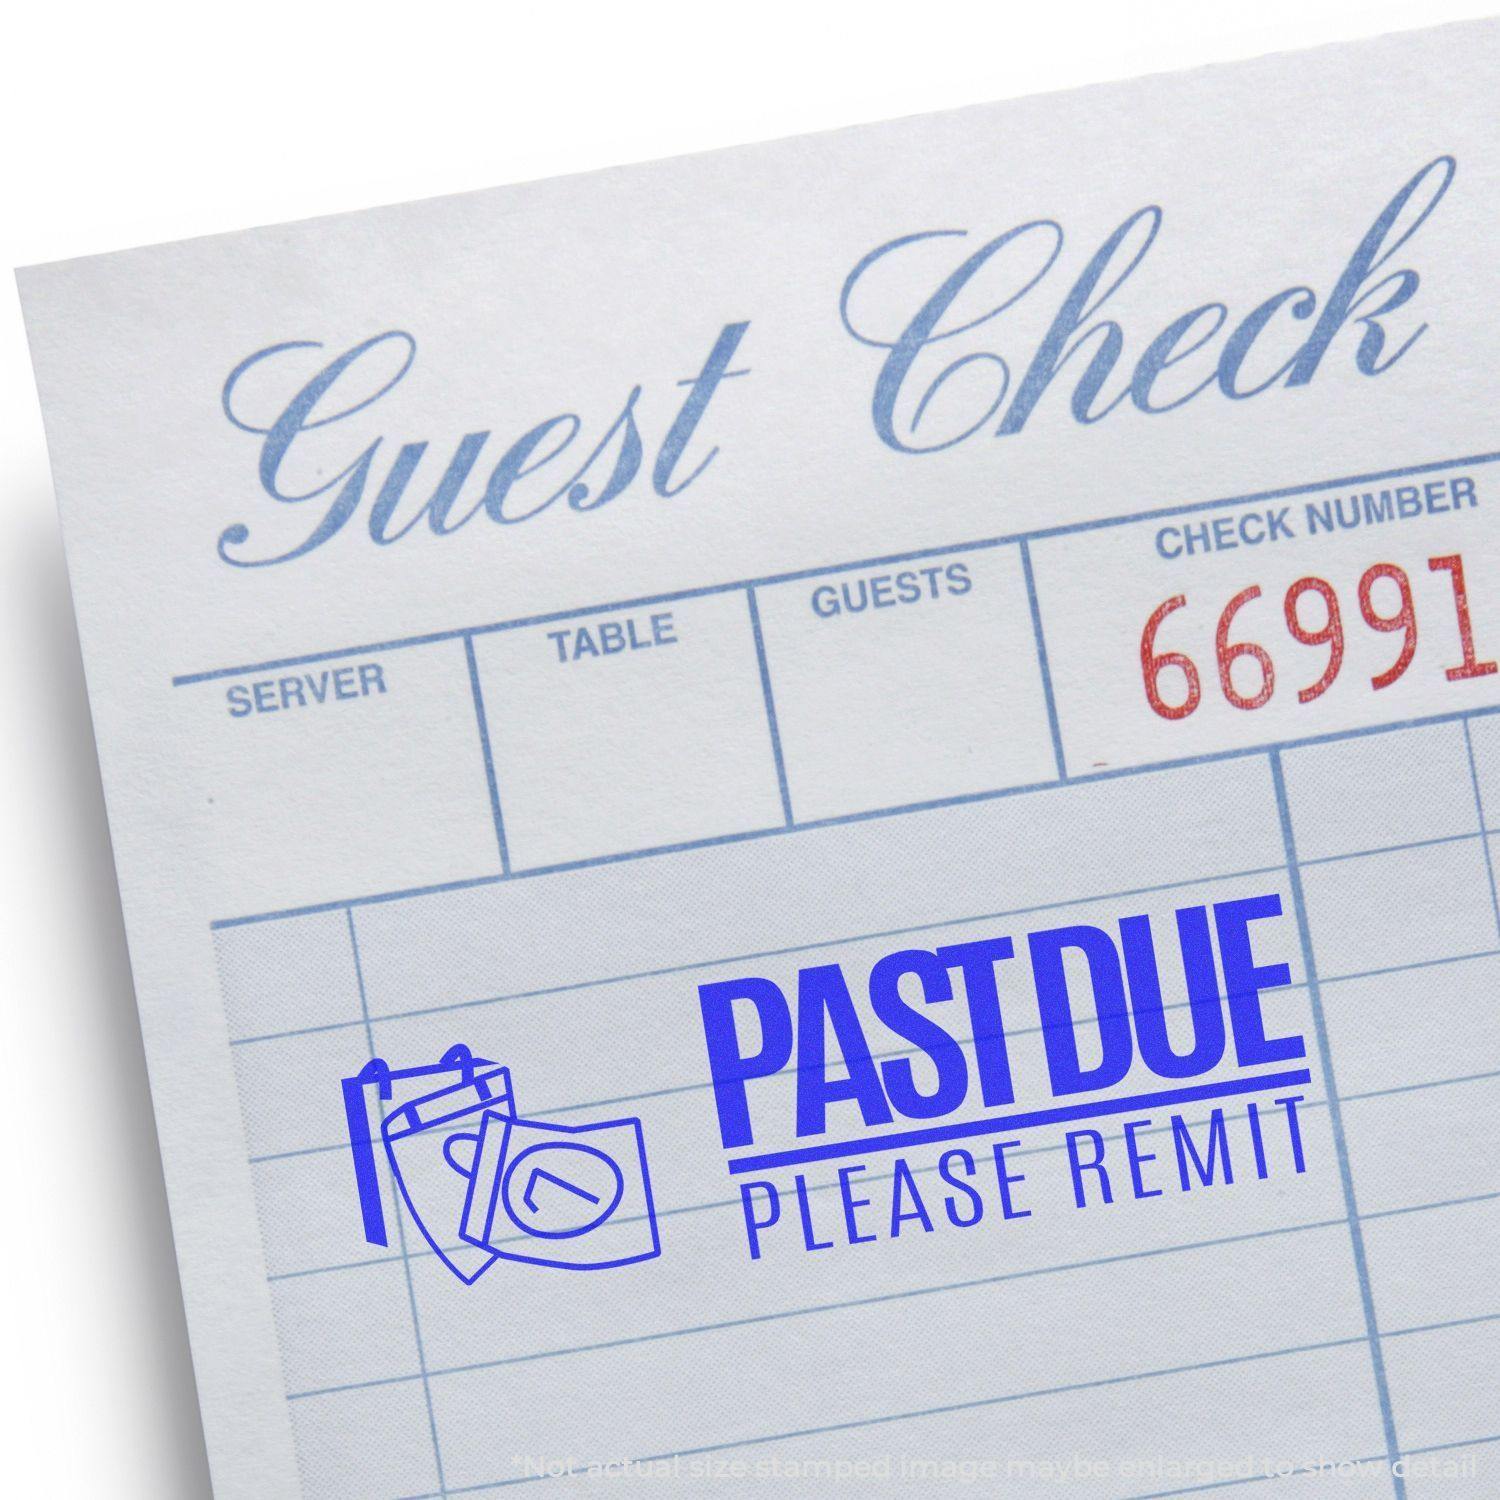 A stock office rubber stamp with a stamped image showing how the text "PAST DUE" in a large bold font (with a line underneath the text) and "PLEASE REMIT" (under a line) in a small font with an icon of a calendar on the left side is displayed after stamping.